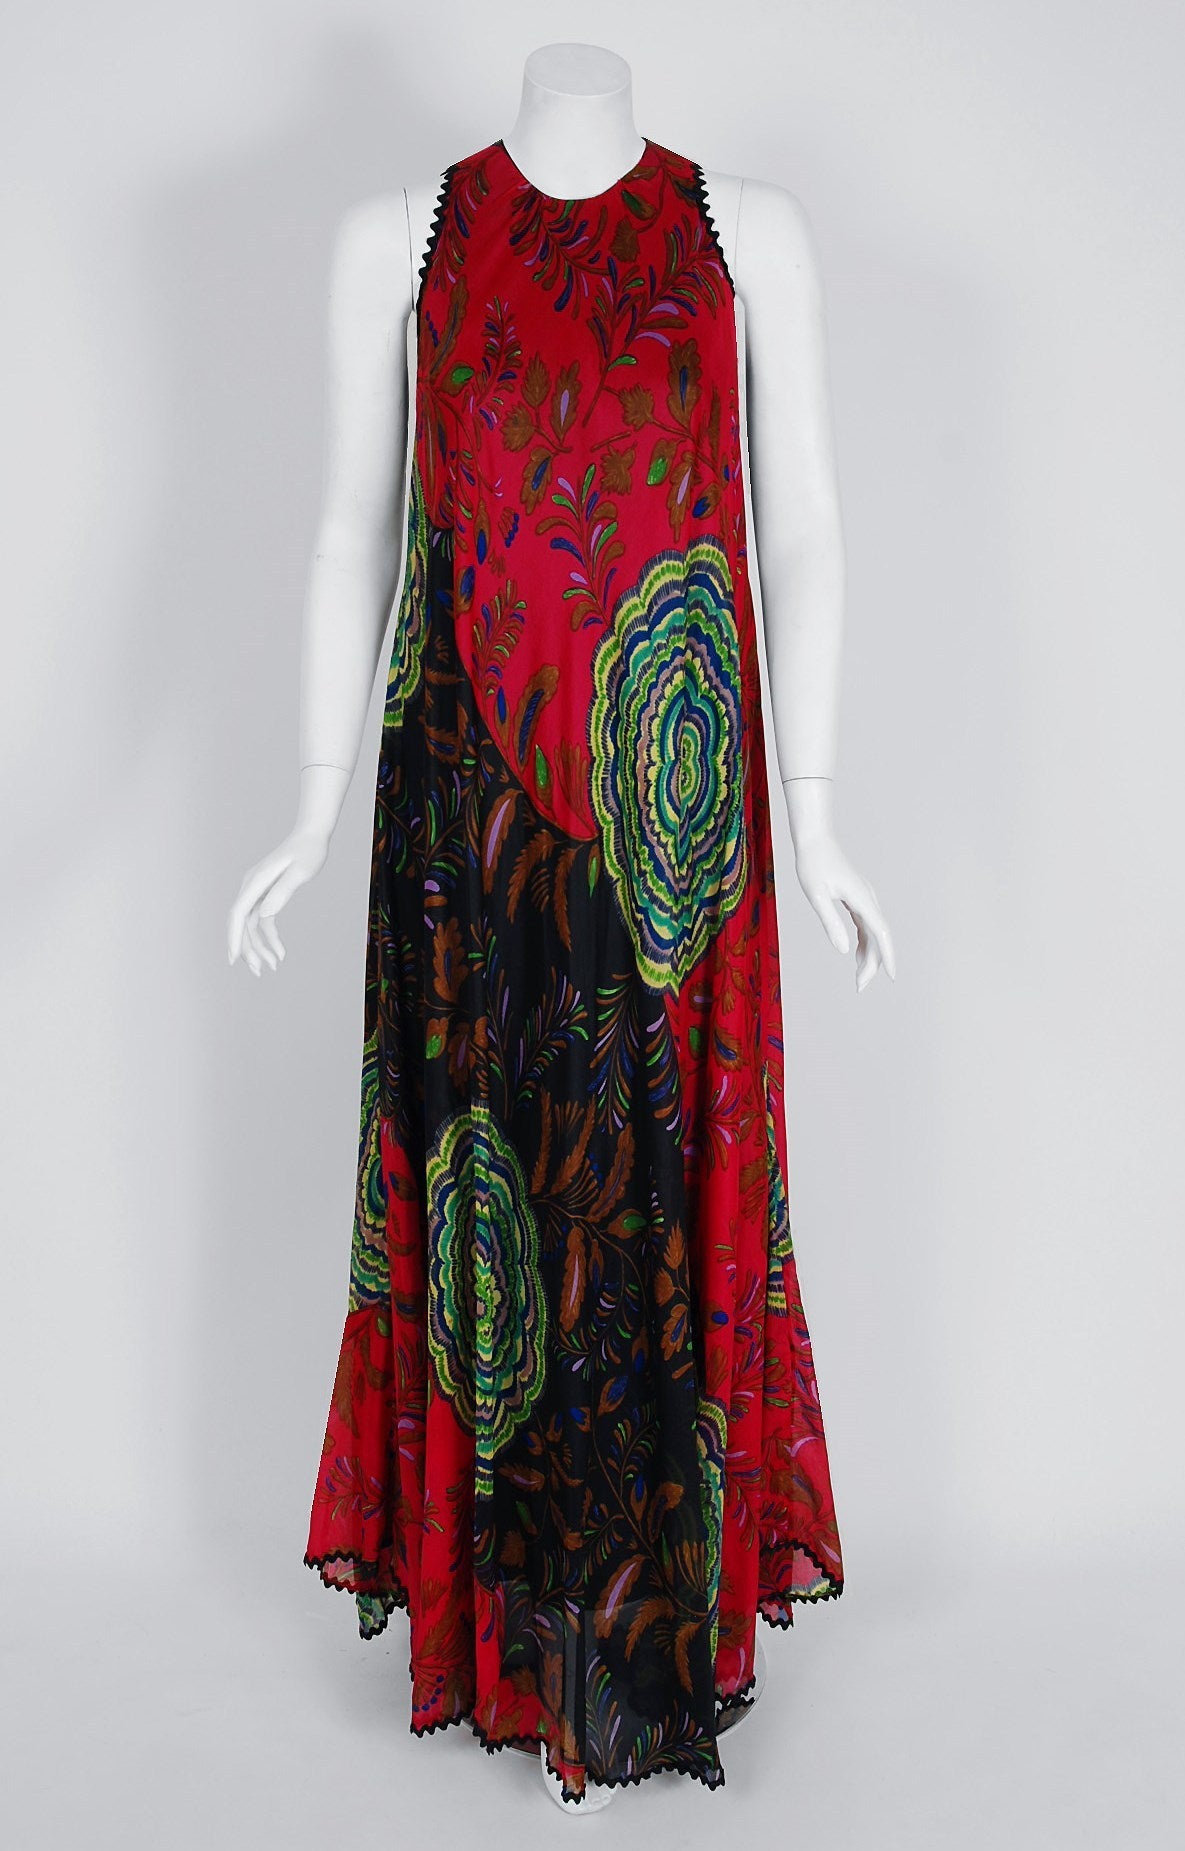 This extremely rare Lanvin Haute-Couture evening gown, from their 1974 collection, is a statement dress. I love the beautiful mix of colors and regal grecian-goddess vibe. It manifests opulence and makes you feel confident. Shaped with princess-line